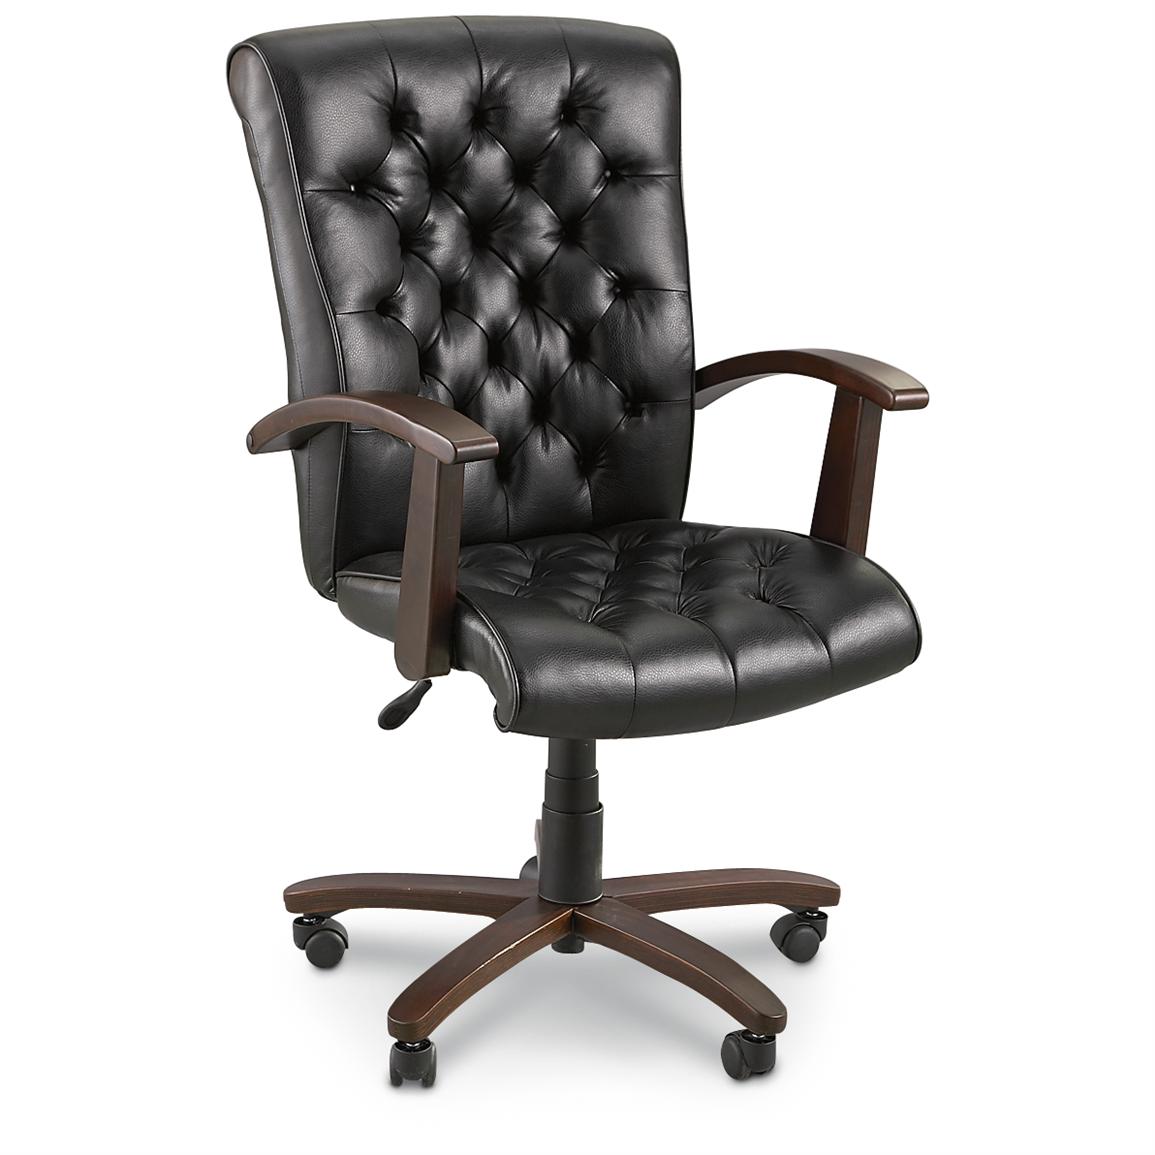 Sealy® Posturepedic® Executive High - back Office Chair, Black - 186155,  Office at Sportsman's Guide